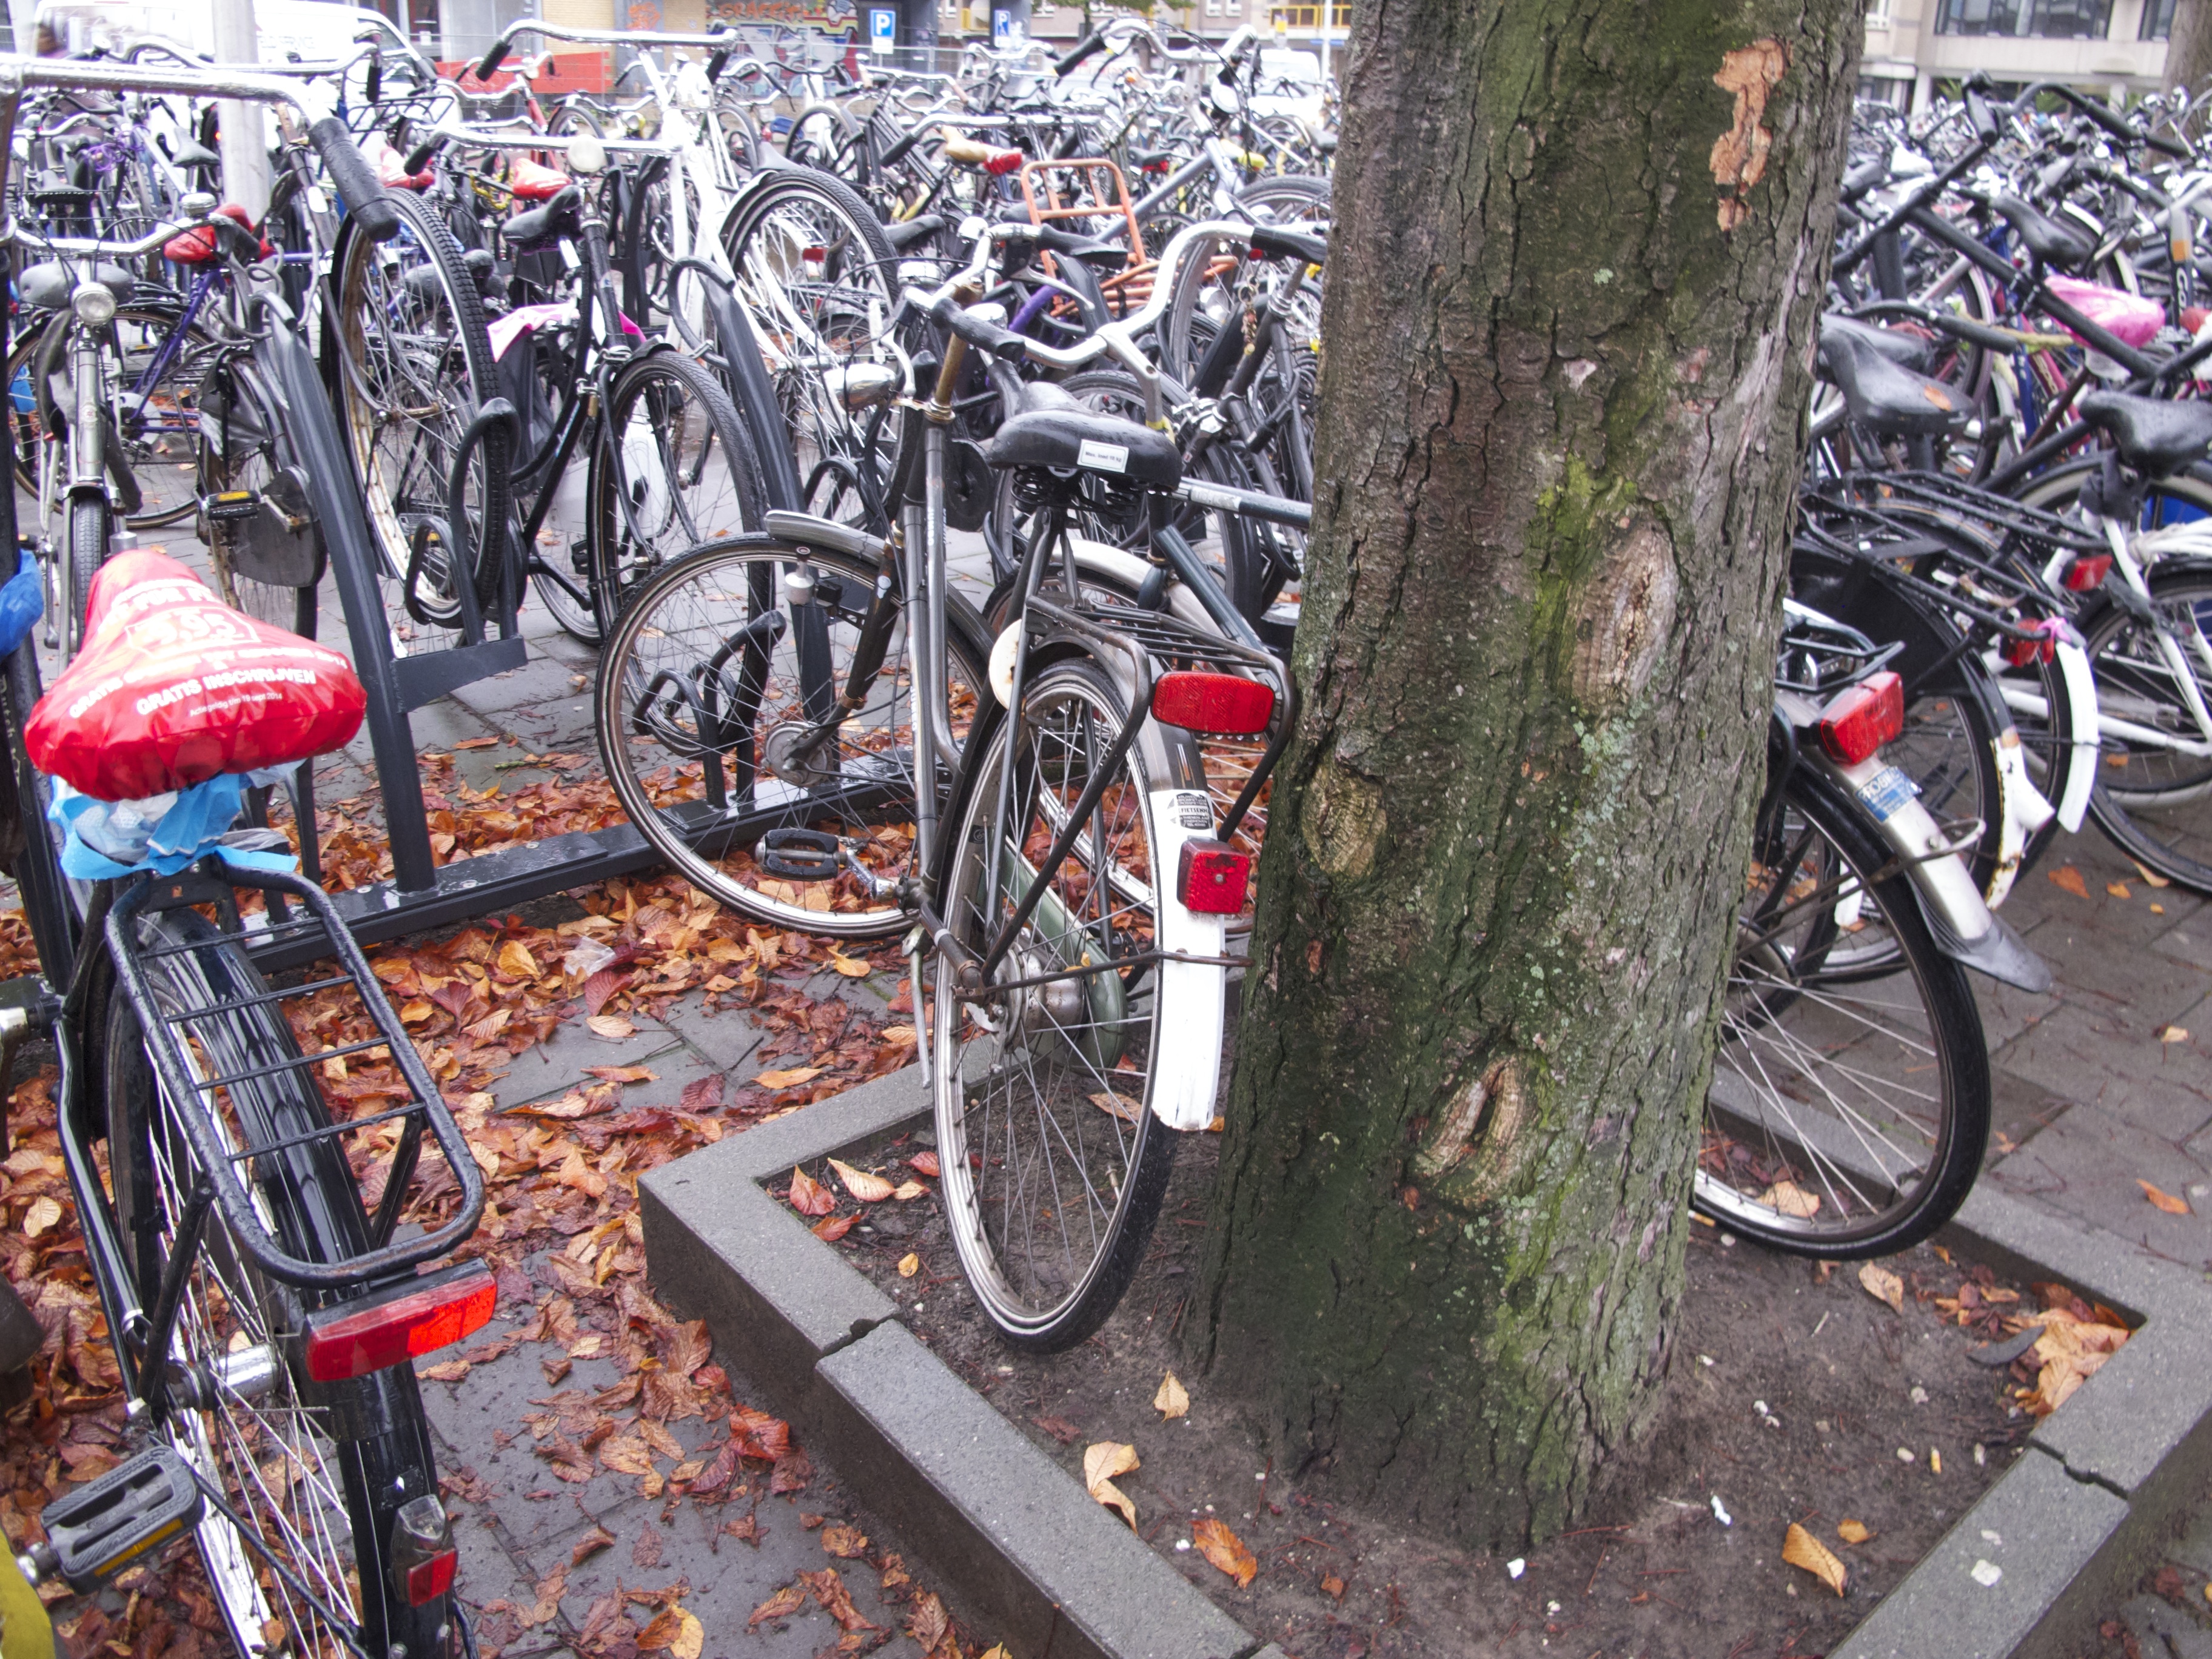 Bicycle parking in smart cities. Co-creating ideas for better solutions, based on the experiences of the cyclists